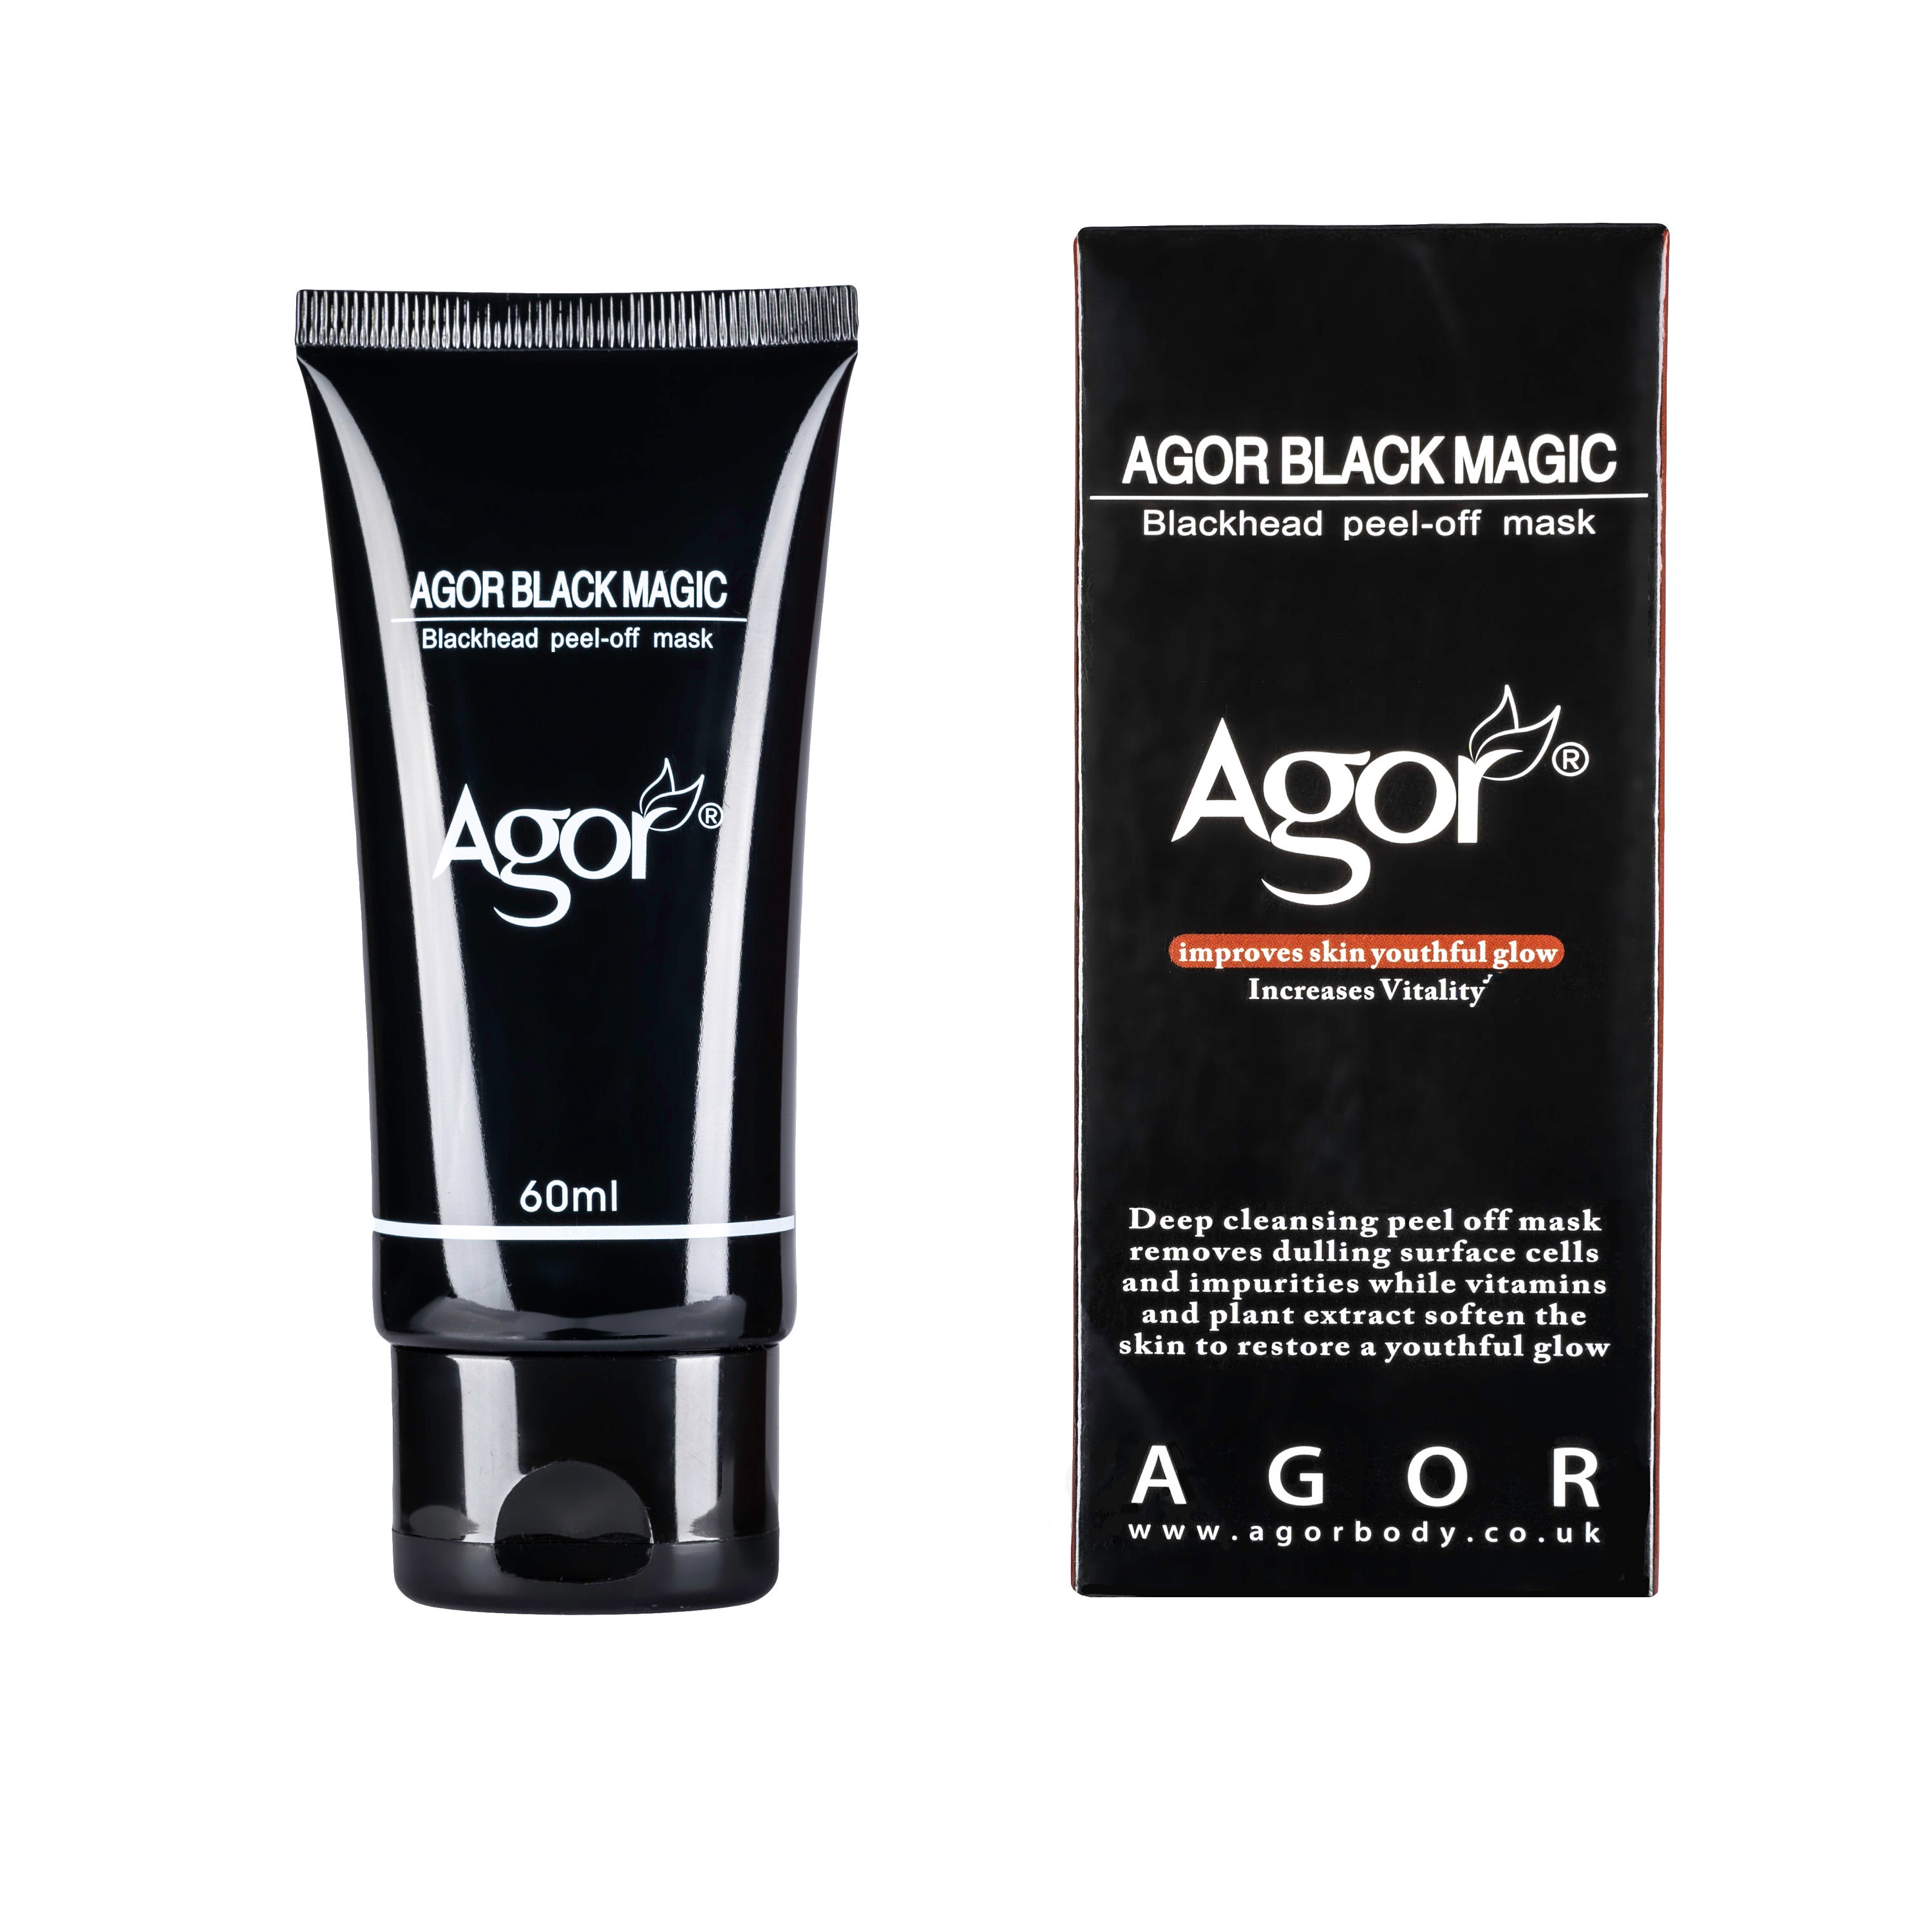 Agor Charcoal Peel-off Black Mask for Removing Impurities